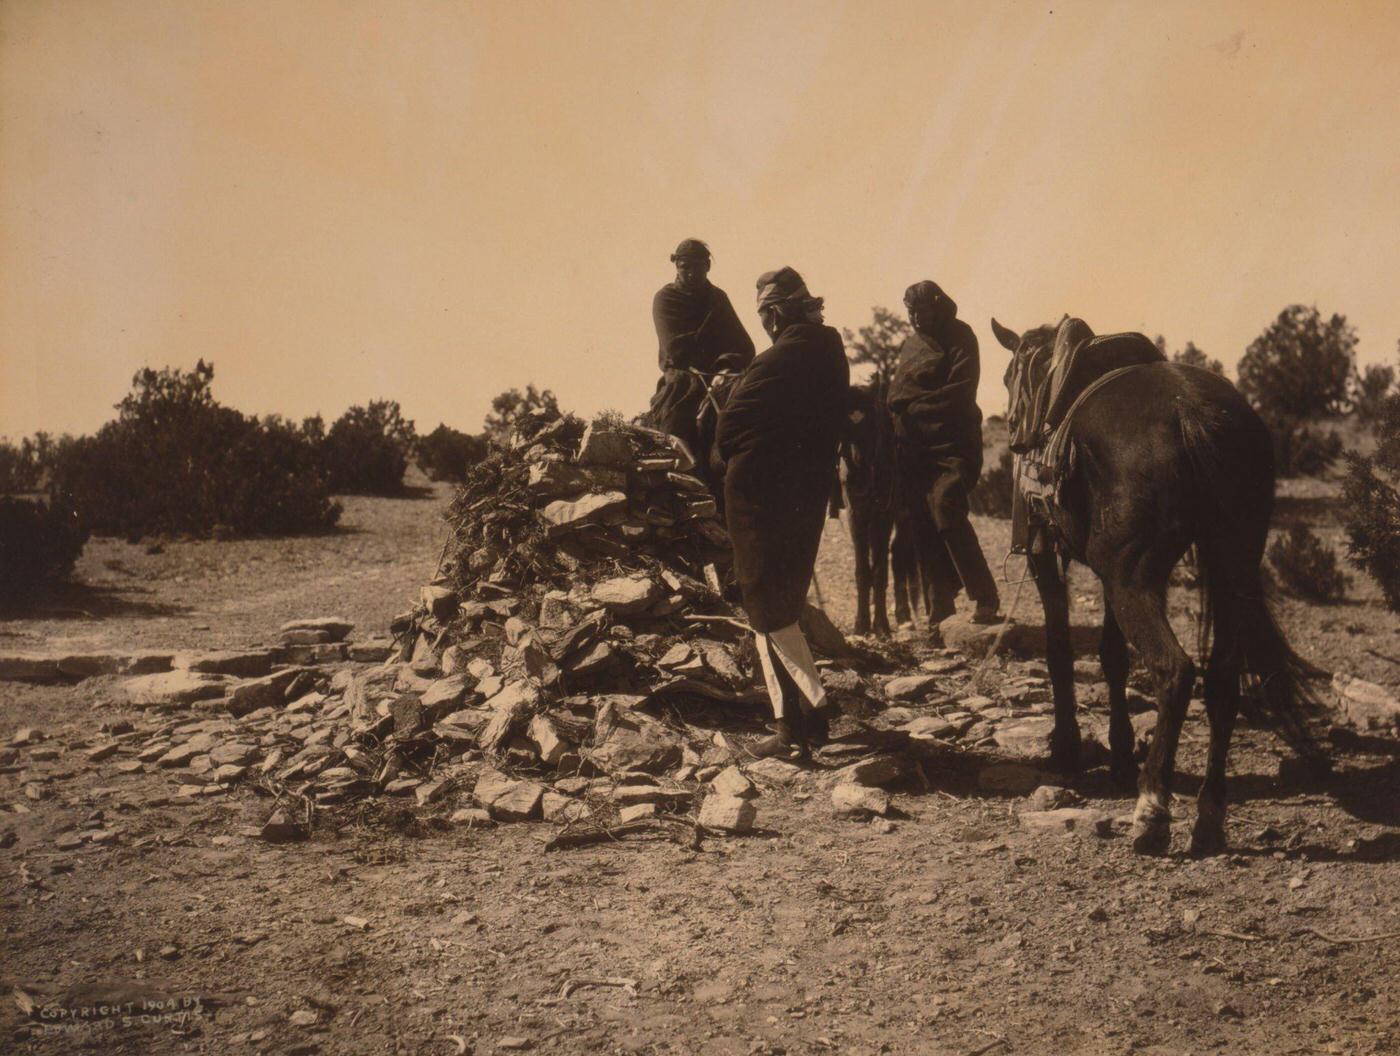 Three Navajos with horses, gathered before mound of rocks and vegetation, 1904